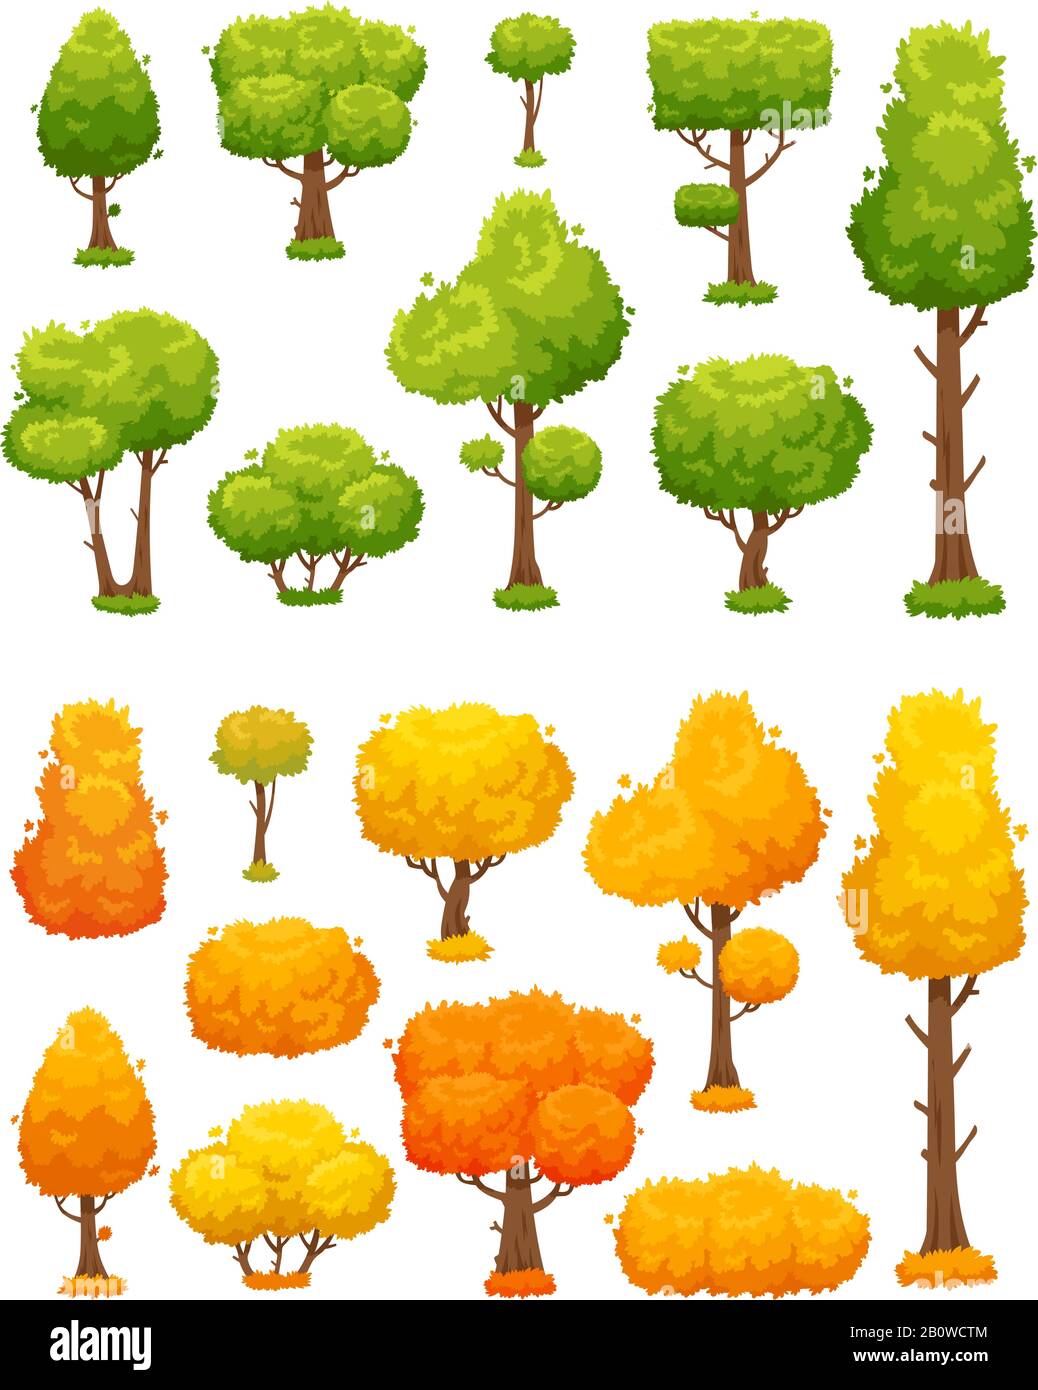 Cartoon tree. Cute wood plants and bushes. Green and yellow autumn trees vector landscape elements Stock Vector